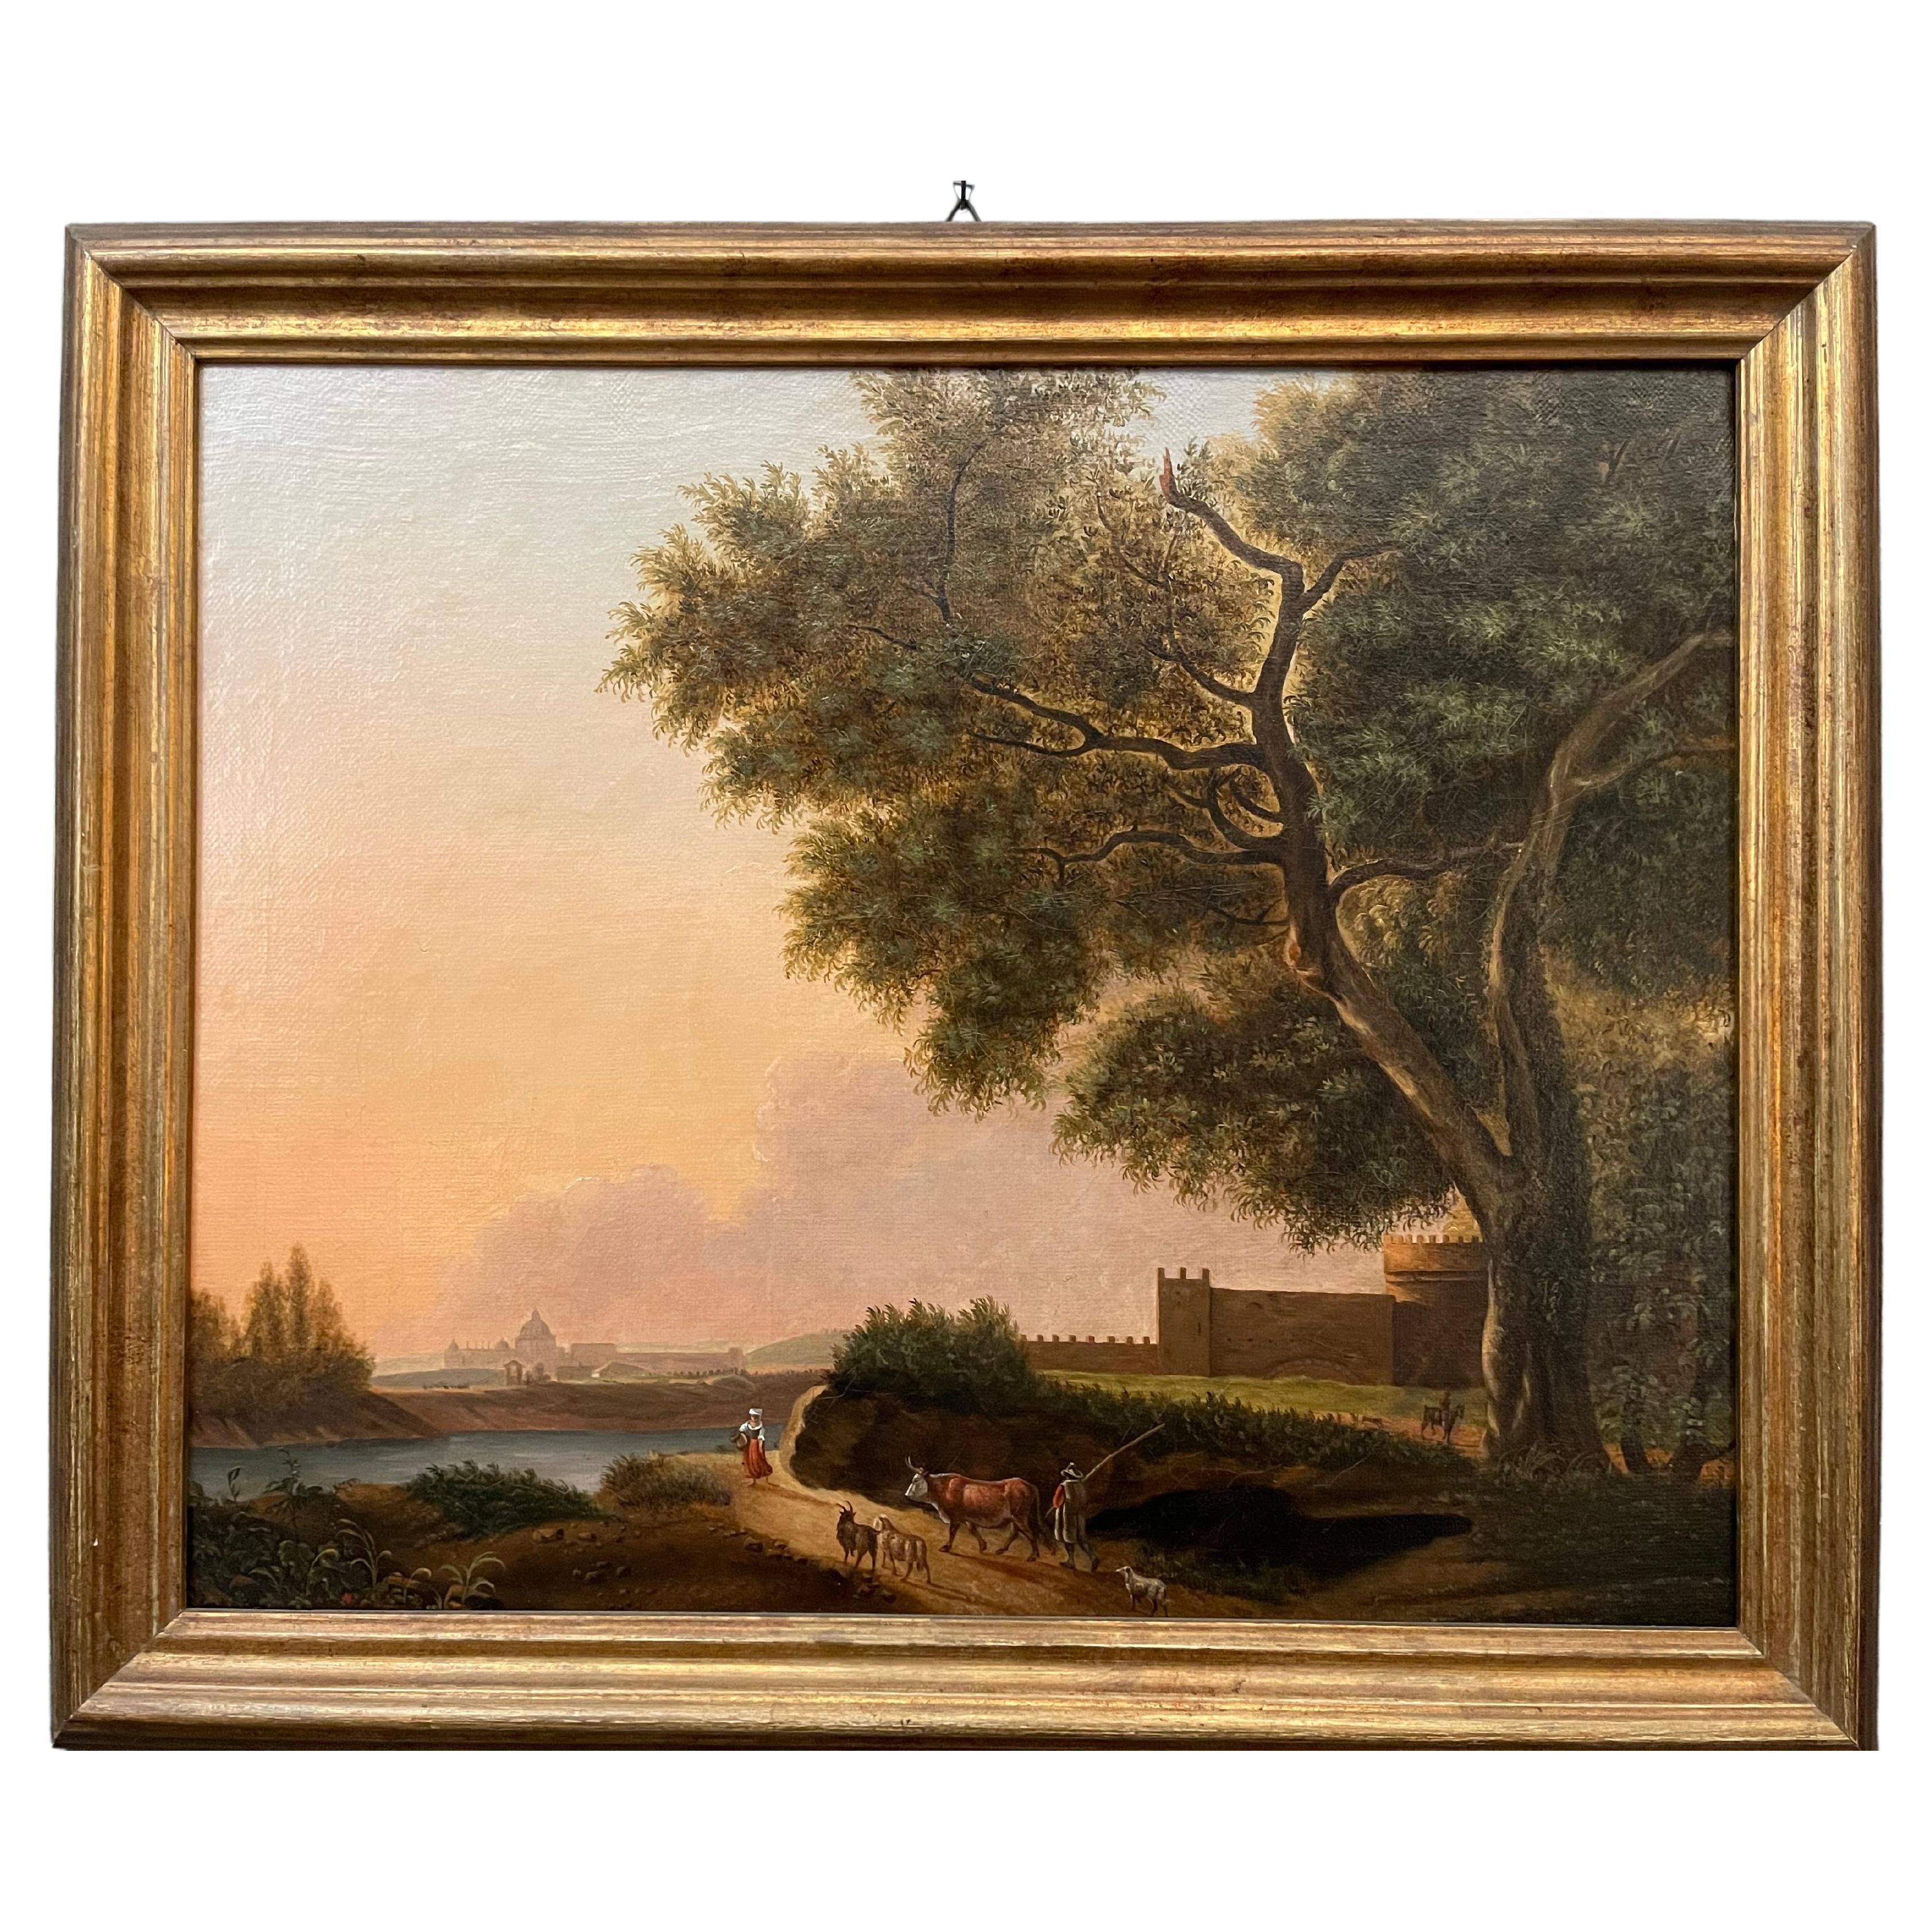  Grand Tour Rectangular Oil on Canvas Roman Countryside Painting